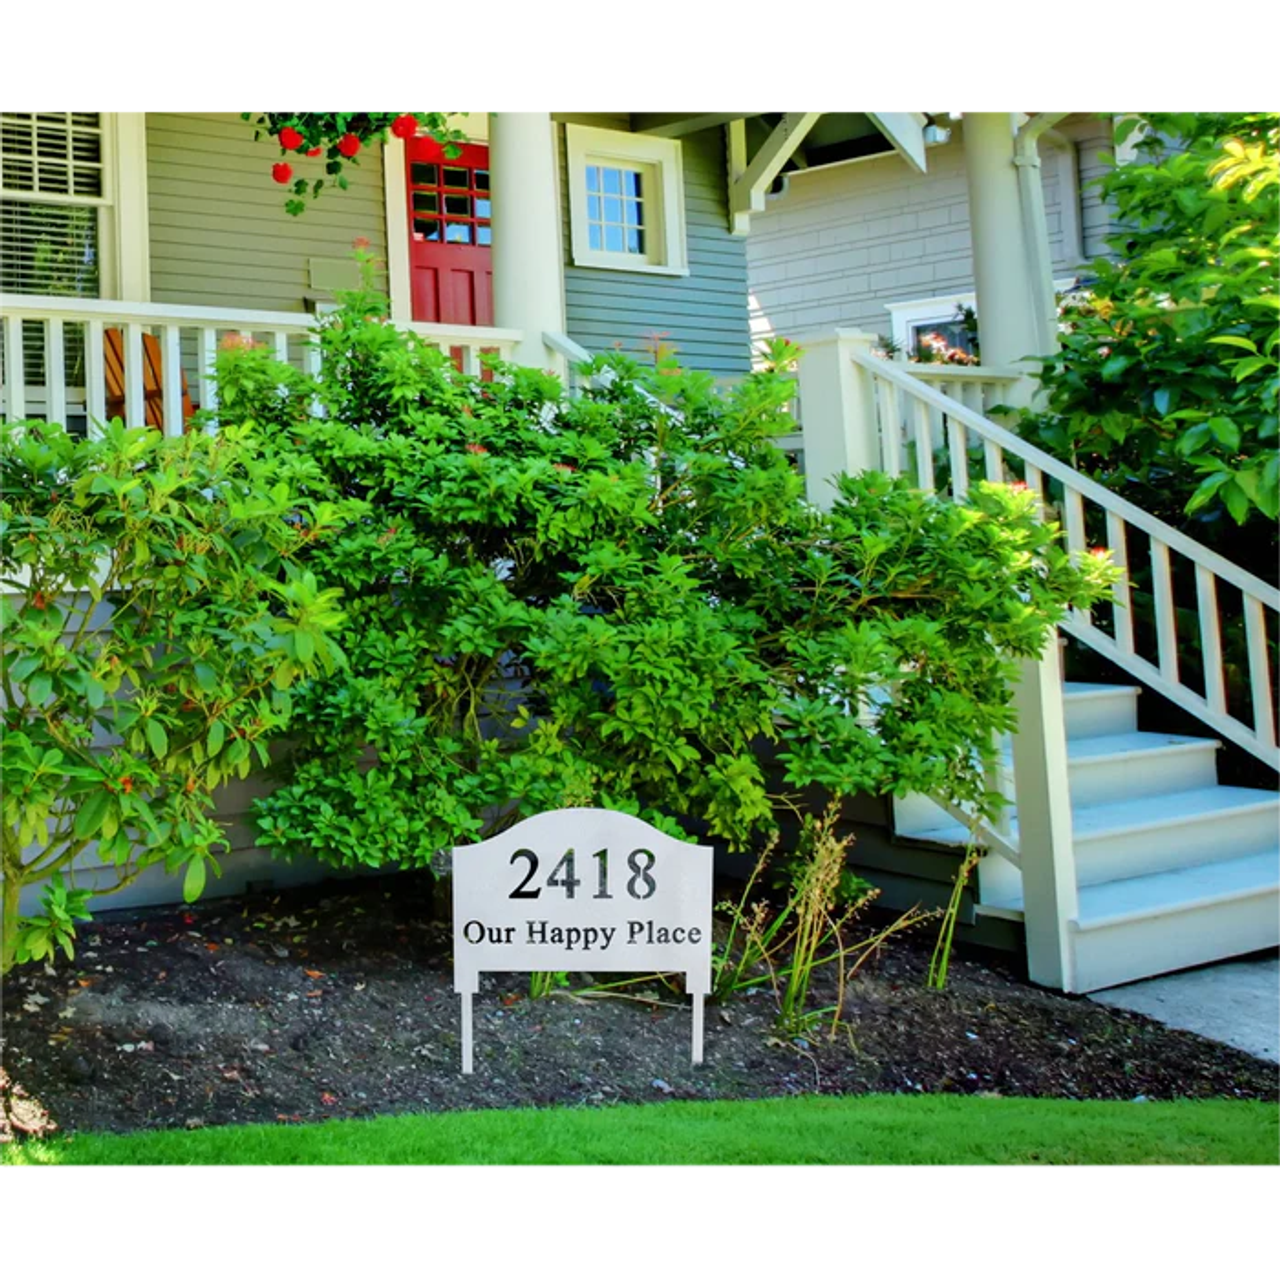 Personalized Staked Address Yard Sign product image